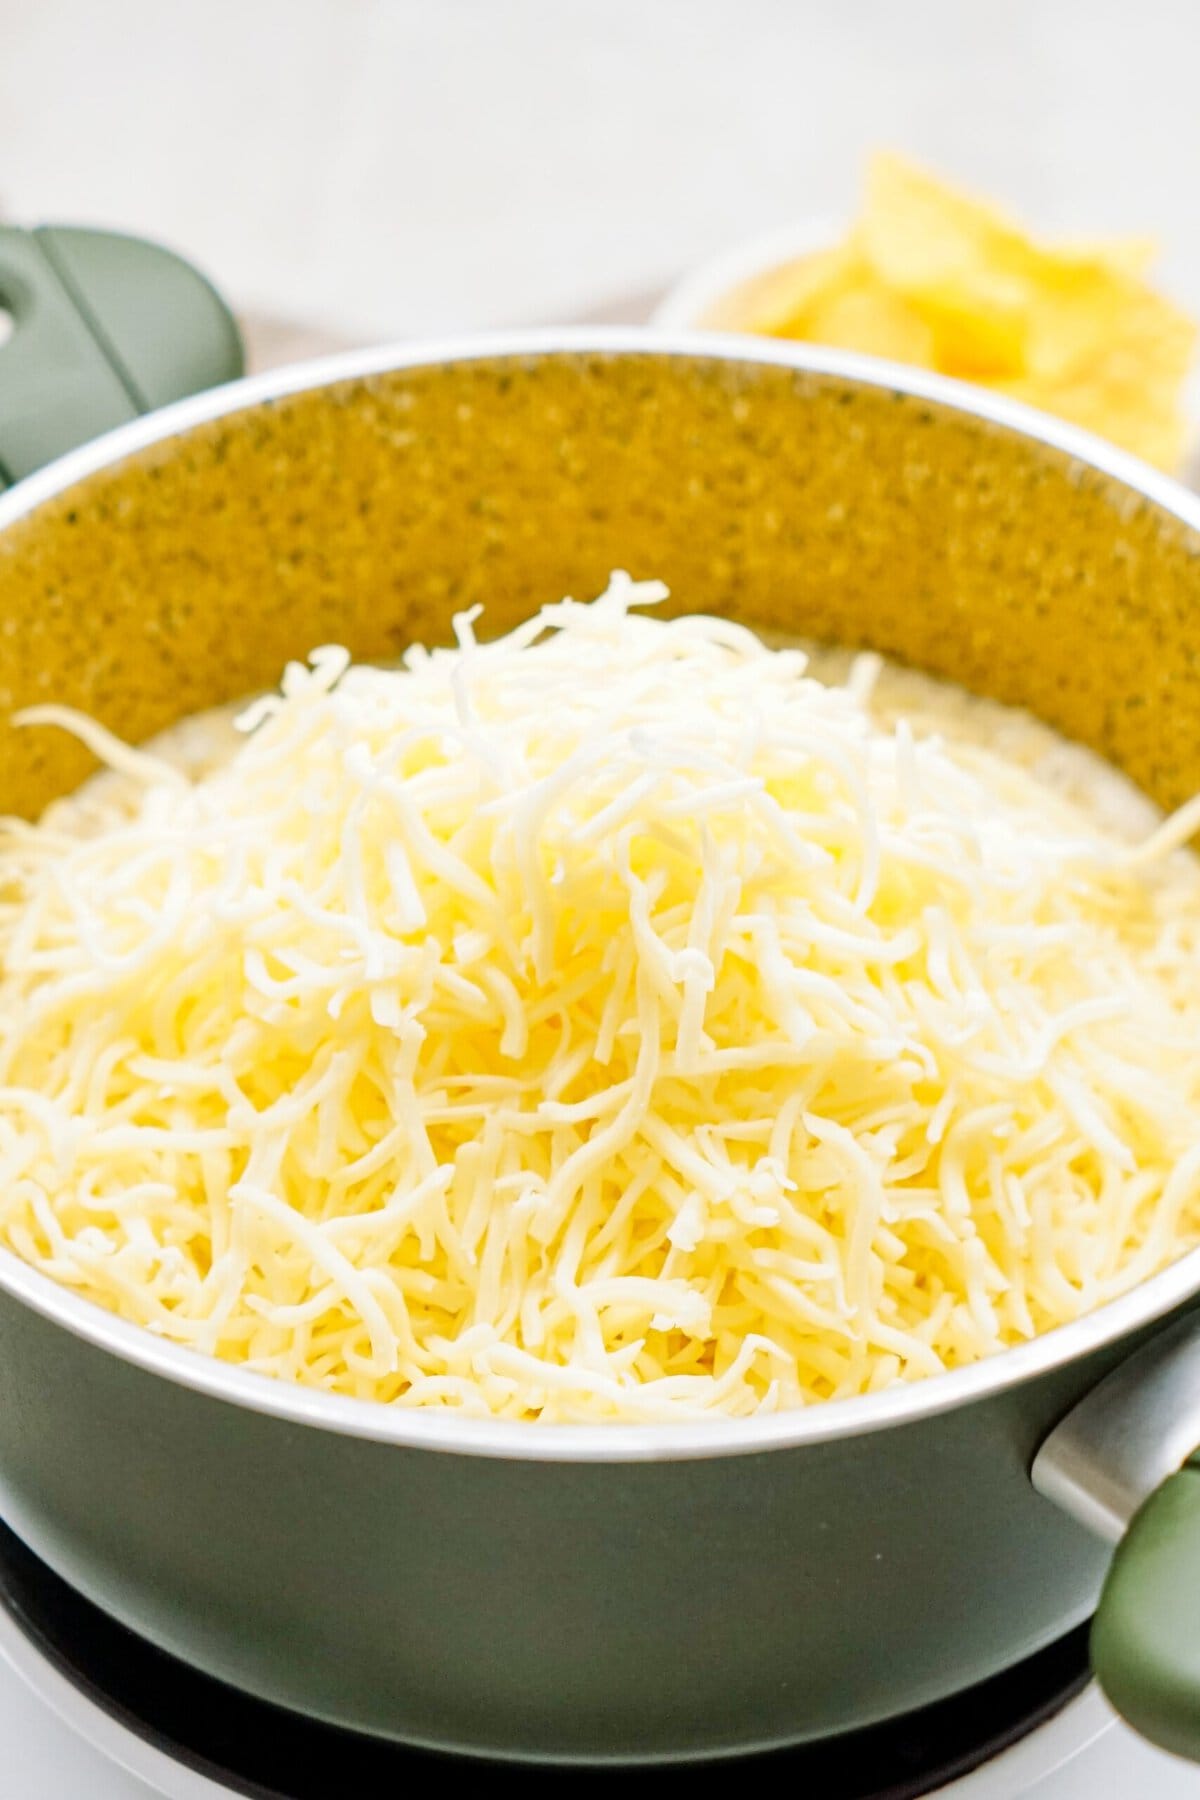 A large pot filled with shredded cheese, ready for melting or cooking.